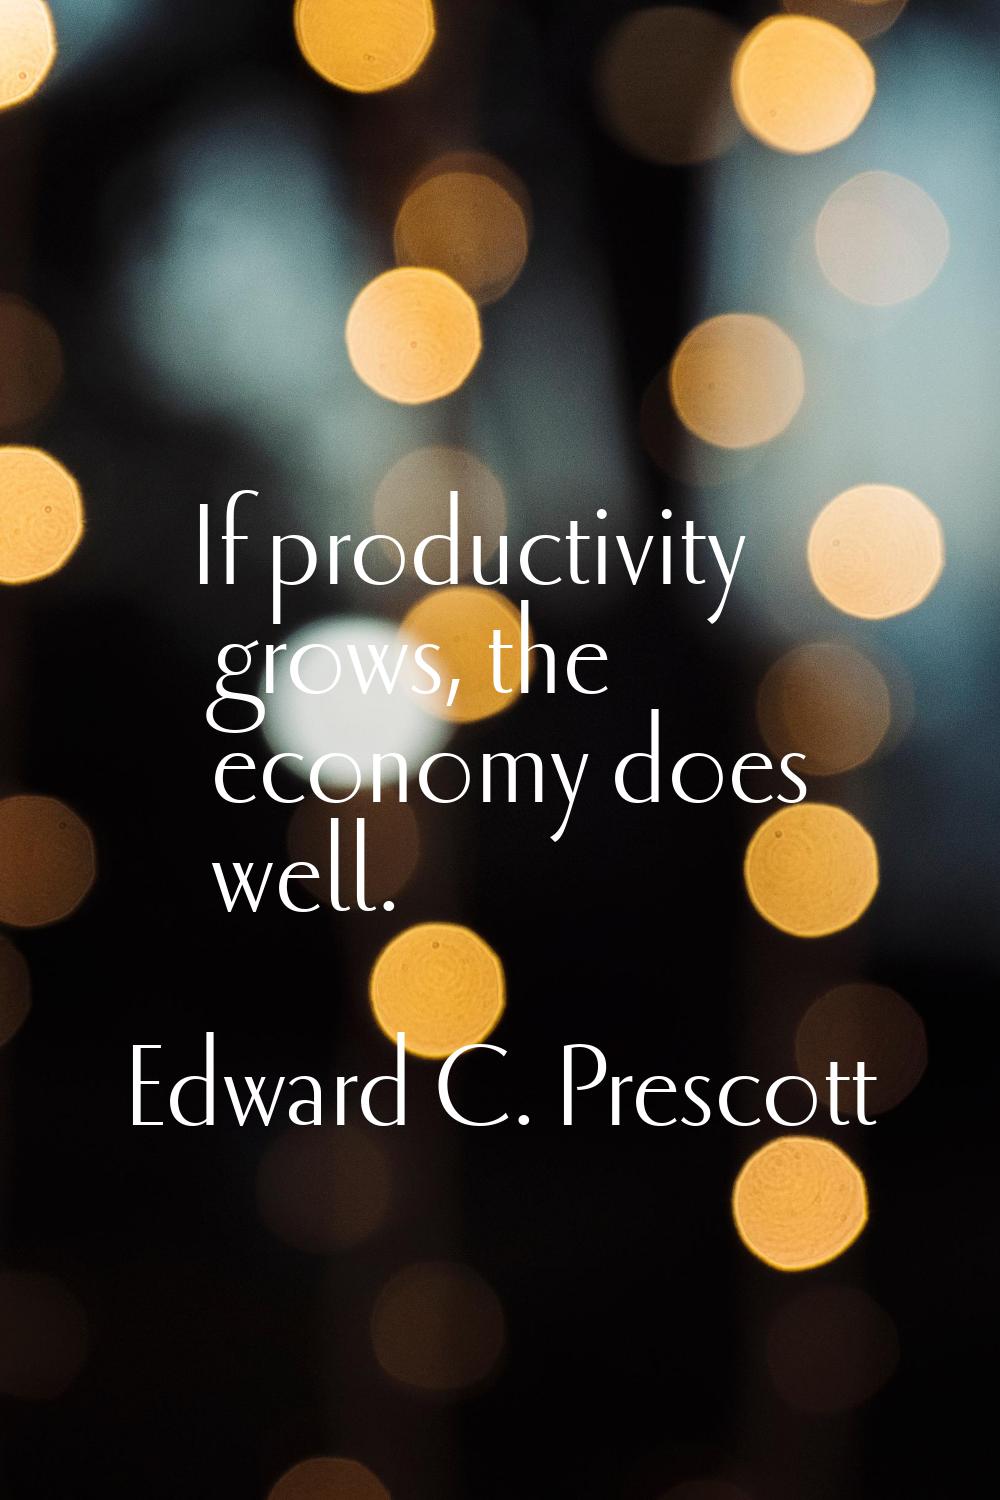 If productivity grows, the economy does well.